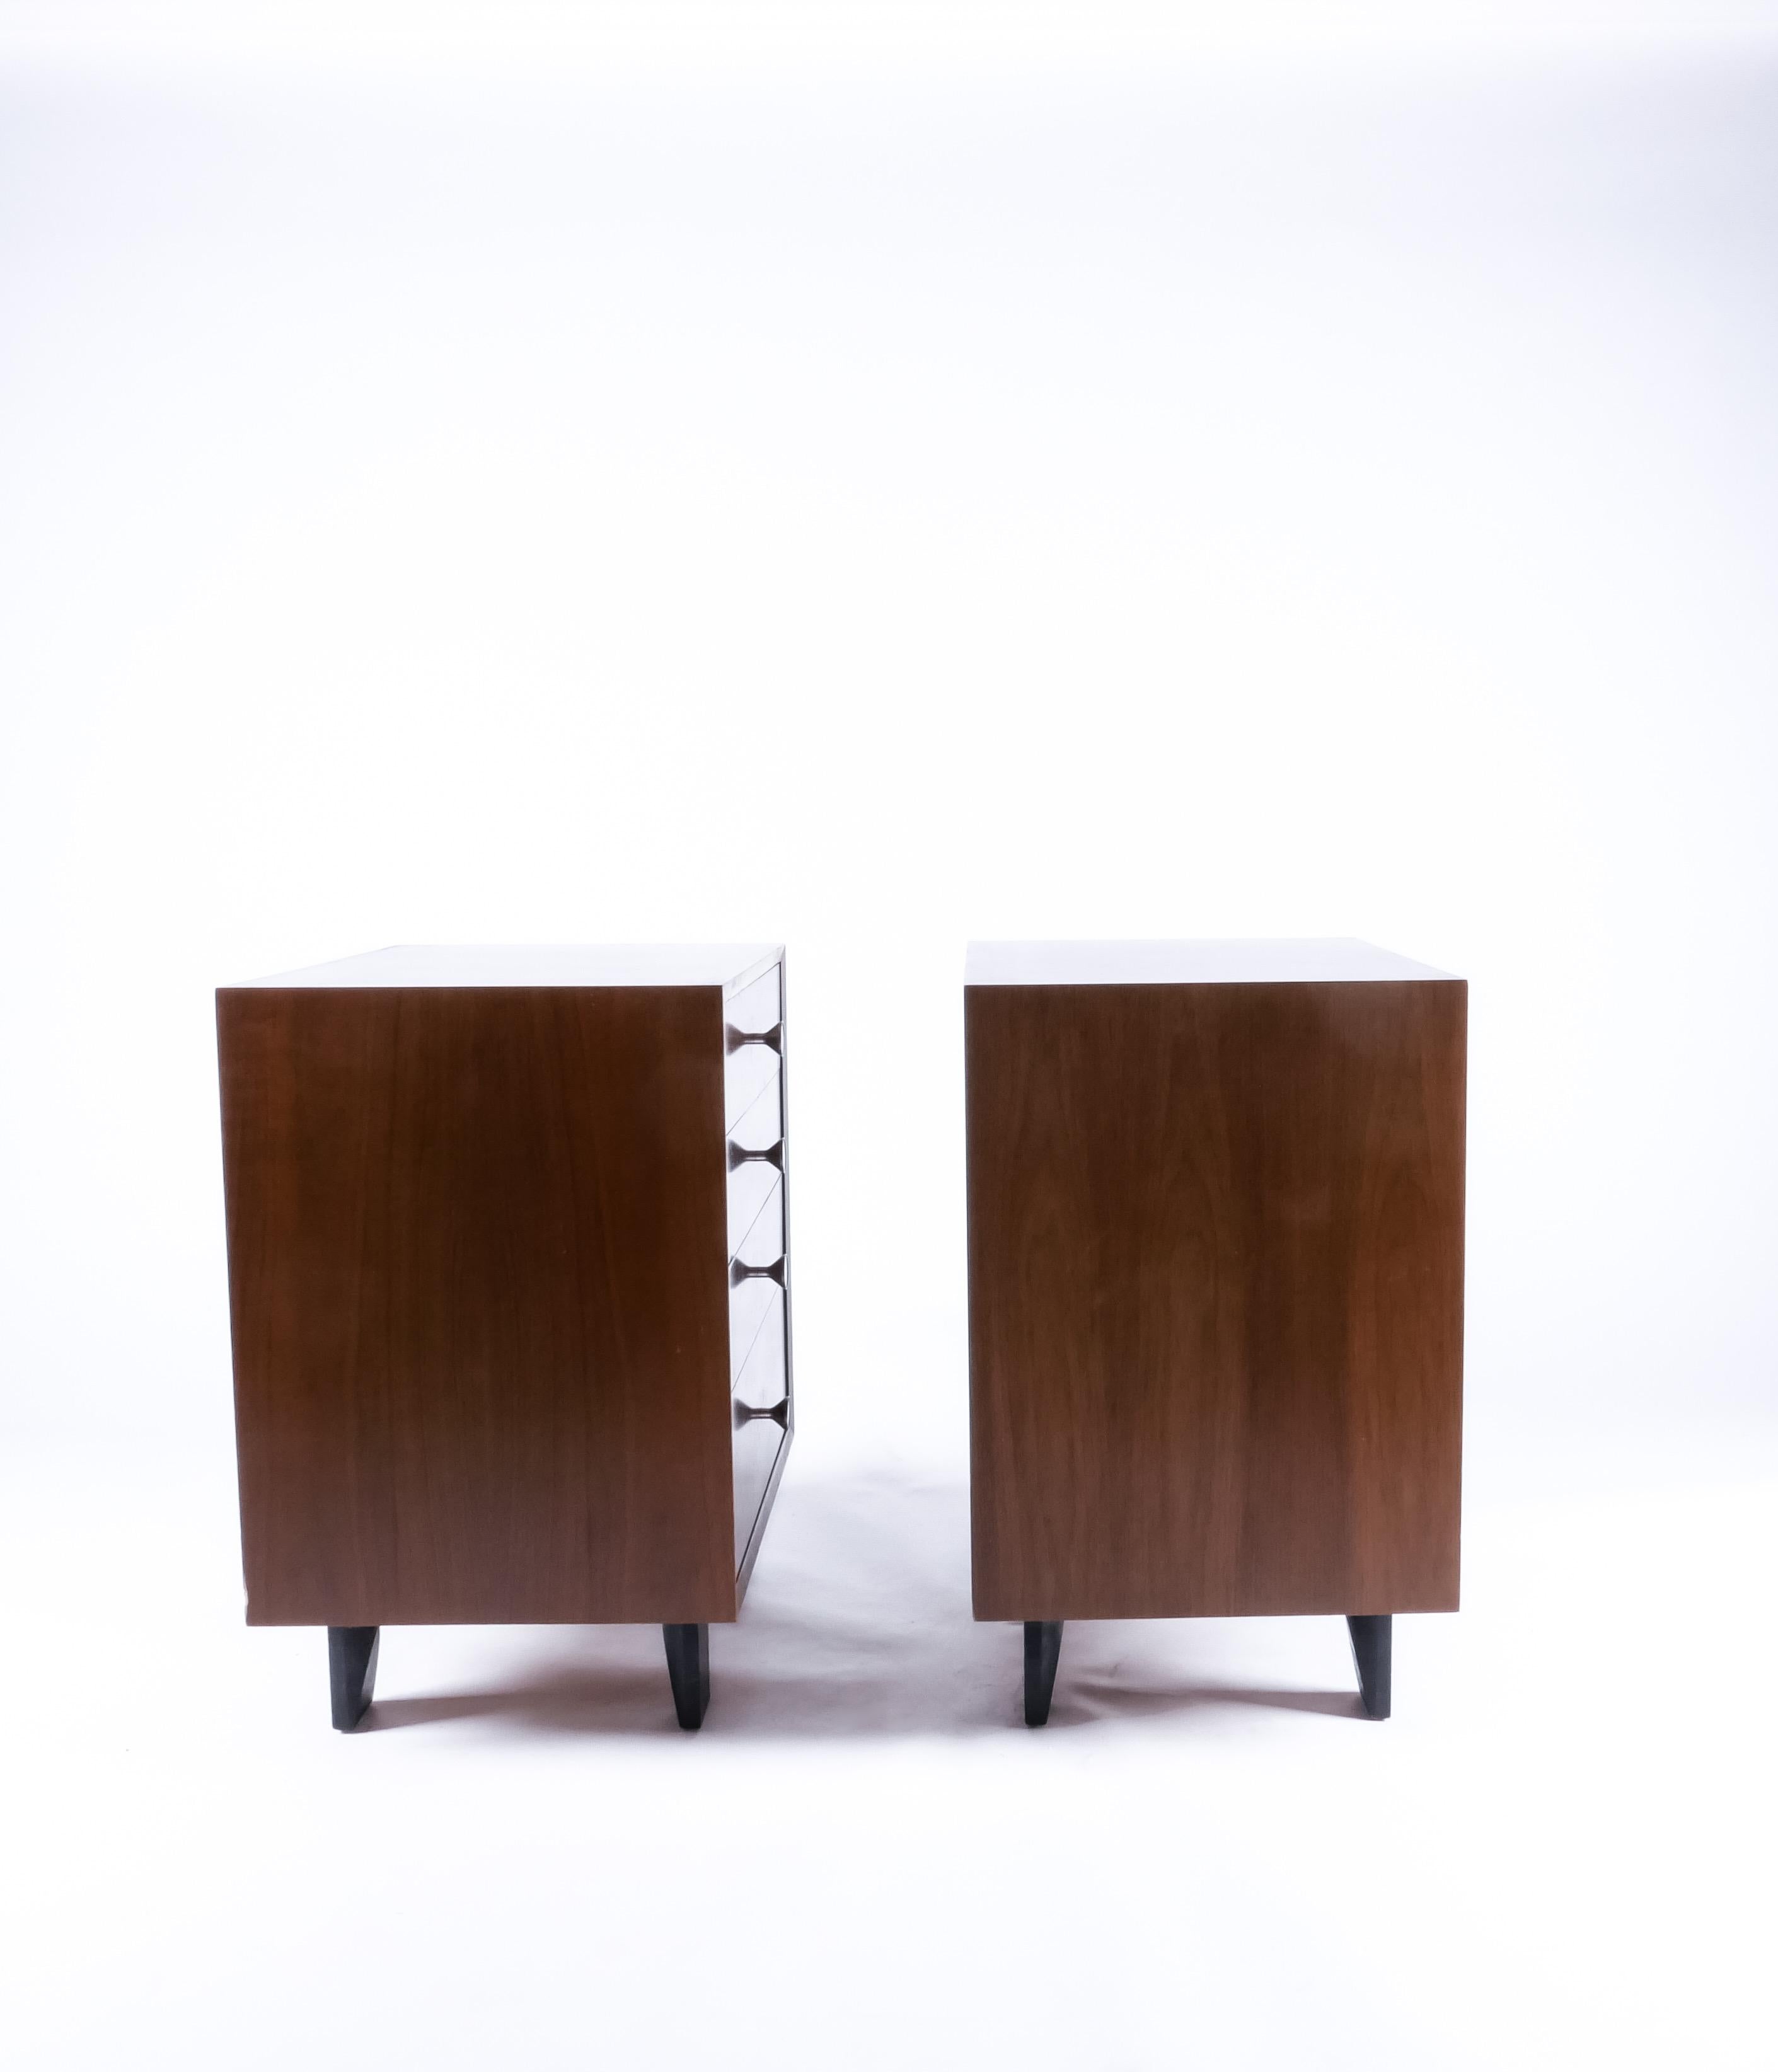 American George Nelson Basic Cabinets, a pair